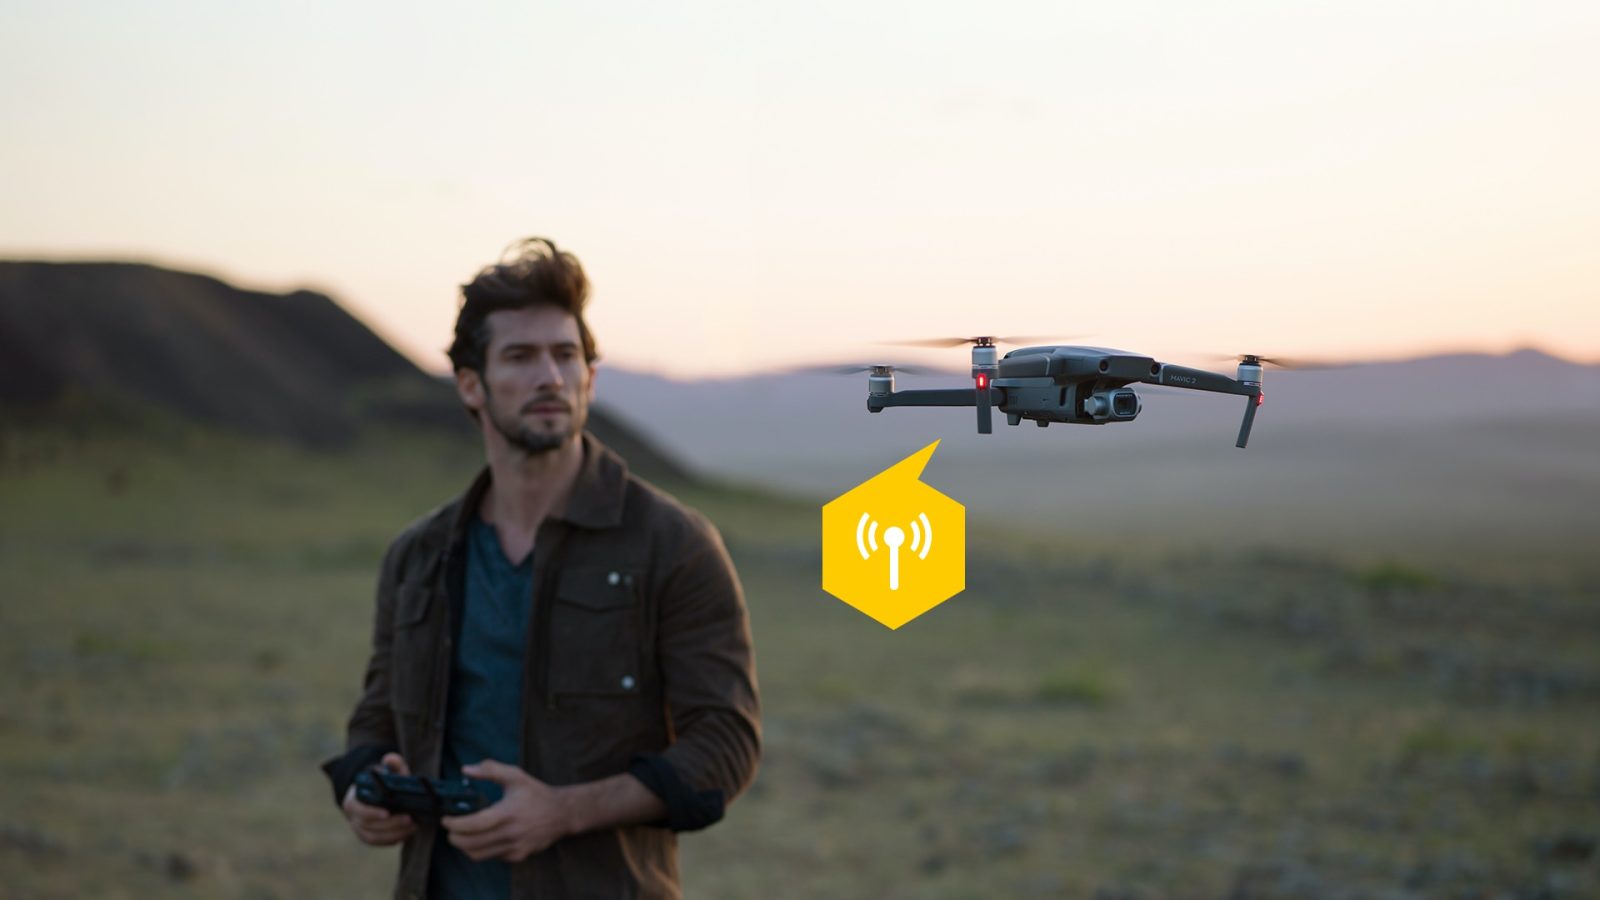 DJI supports Remote ID but warns against FAA's "deeply flawed" NPRM